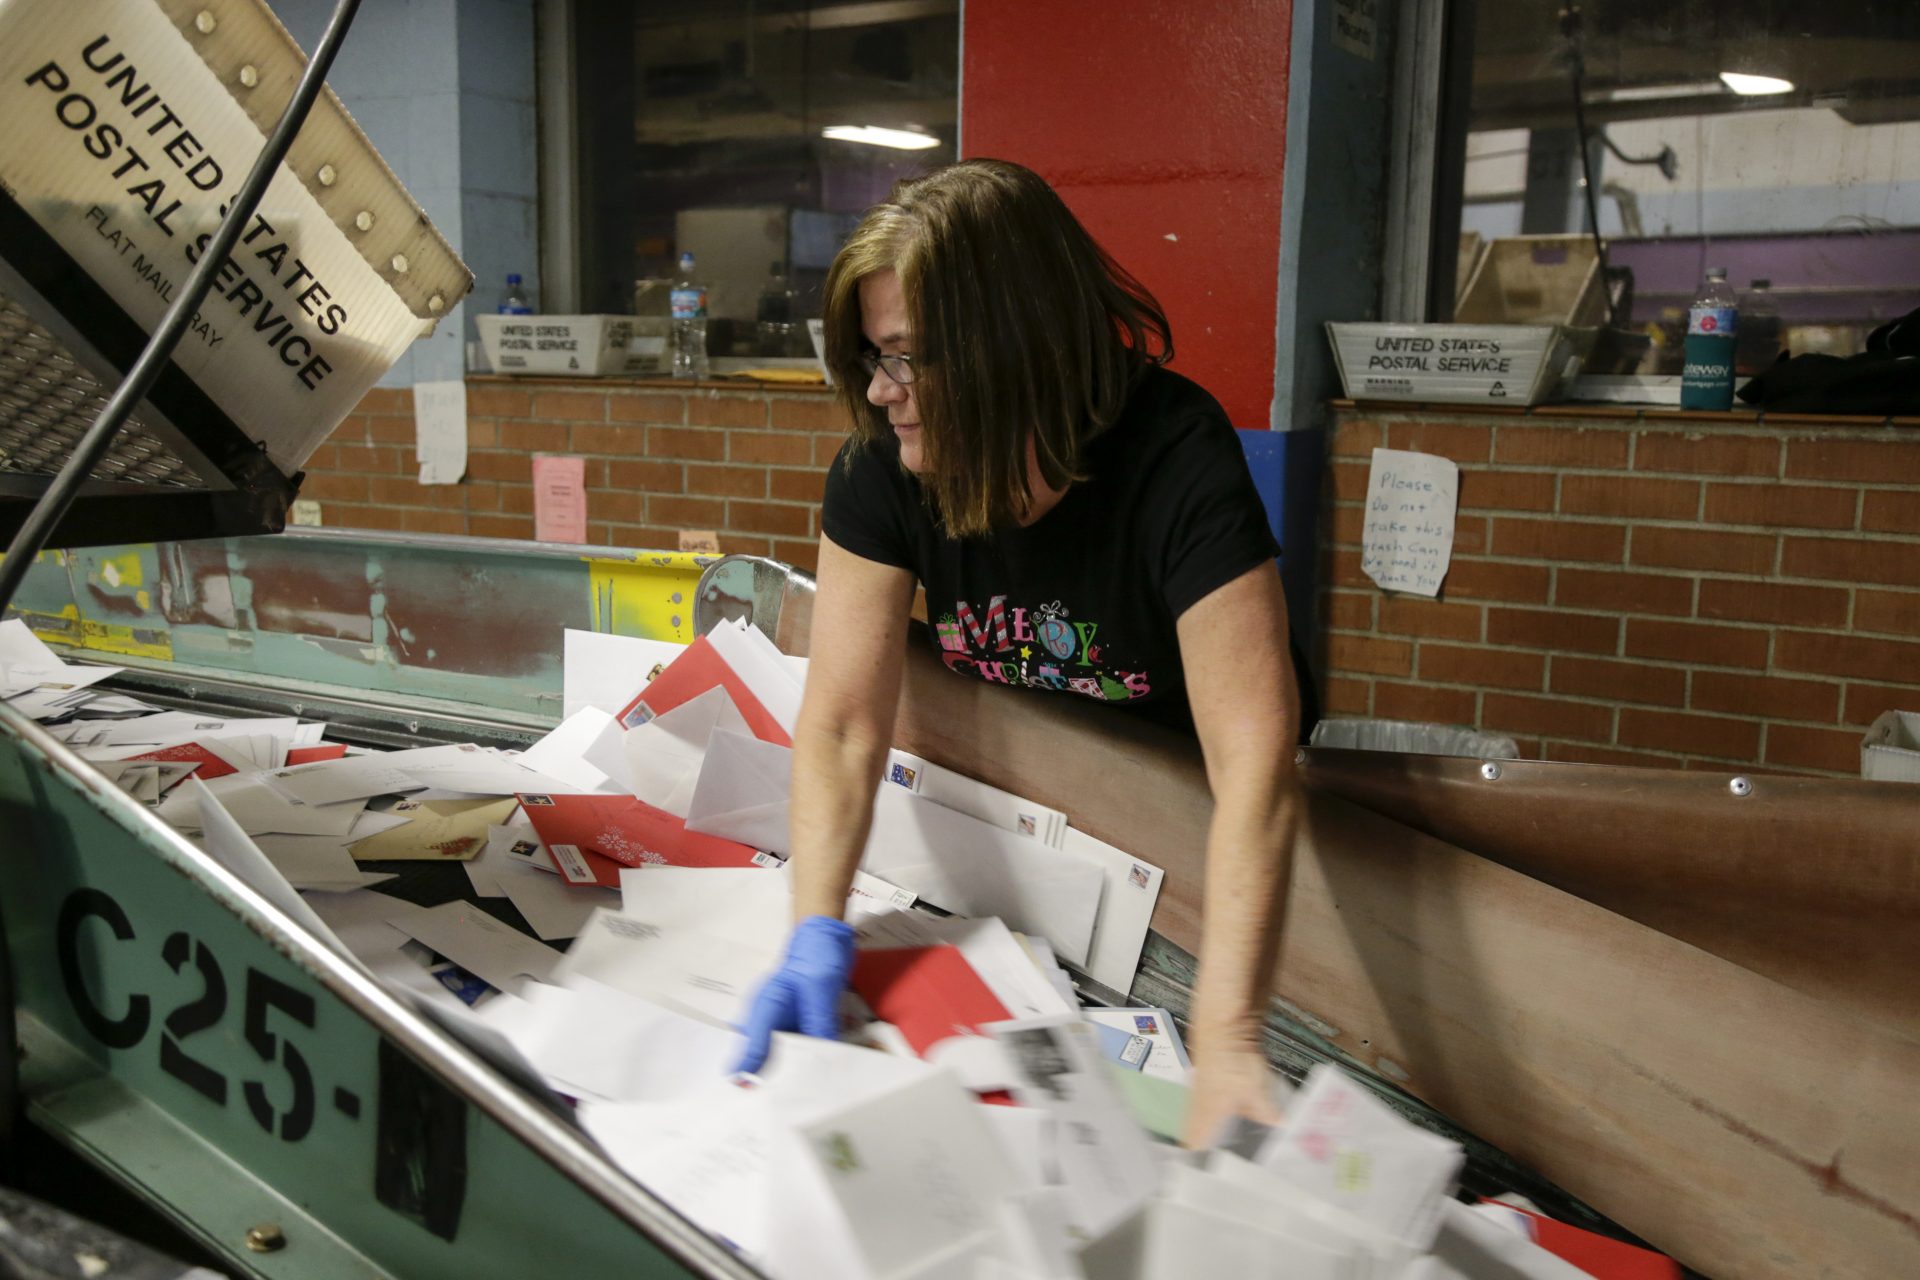 FILE PHOTO: Postal Service employee Mary Lichtenwalt sorts mail at a conveyor belt at the main post office in Omaha, Neb., Thursday, Dec. 14, 2017.